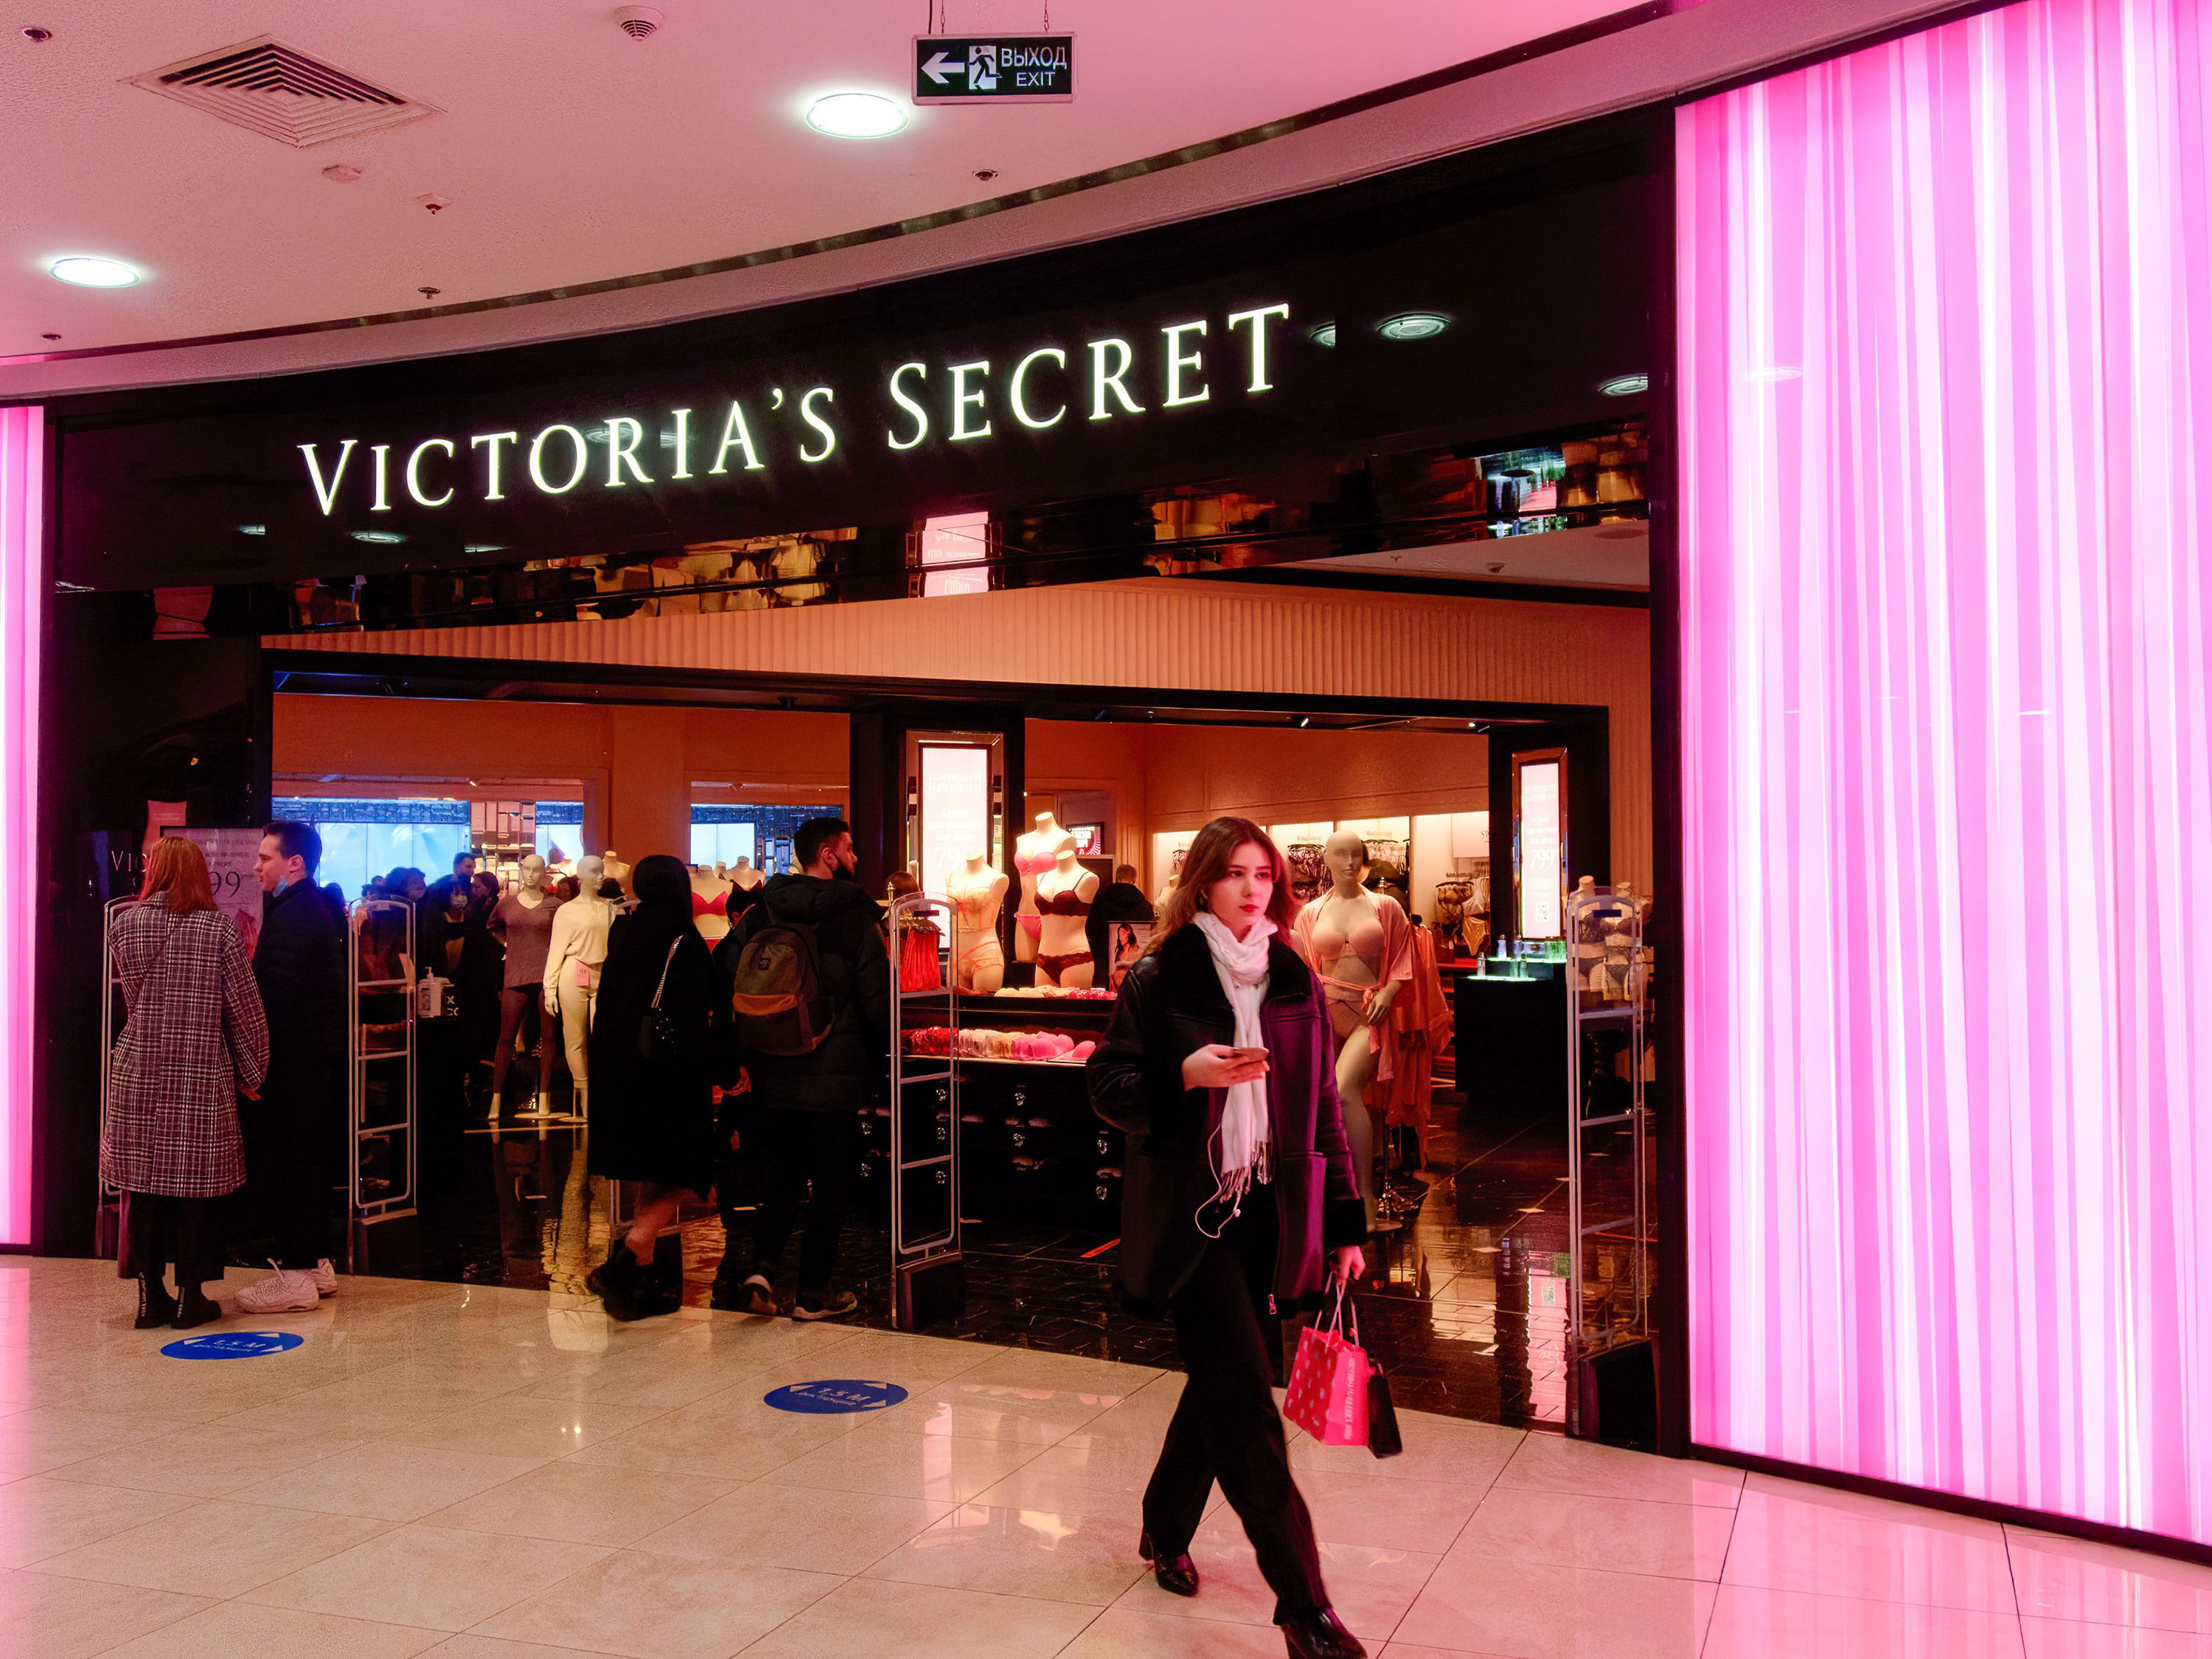 What's inside my new Victoria's Secret Shopping Bag?